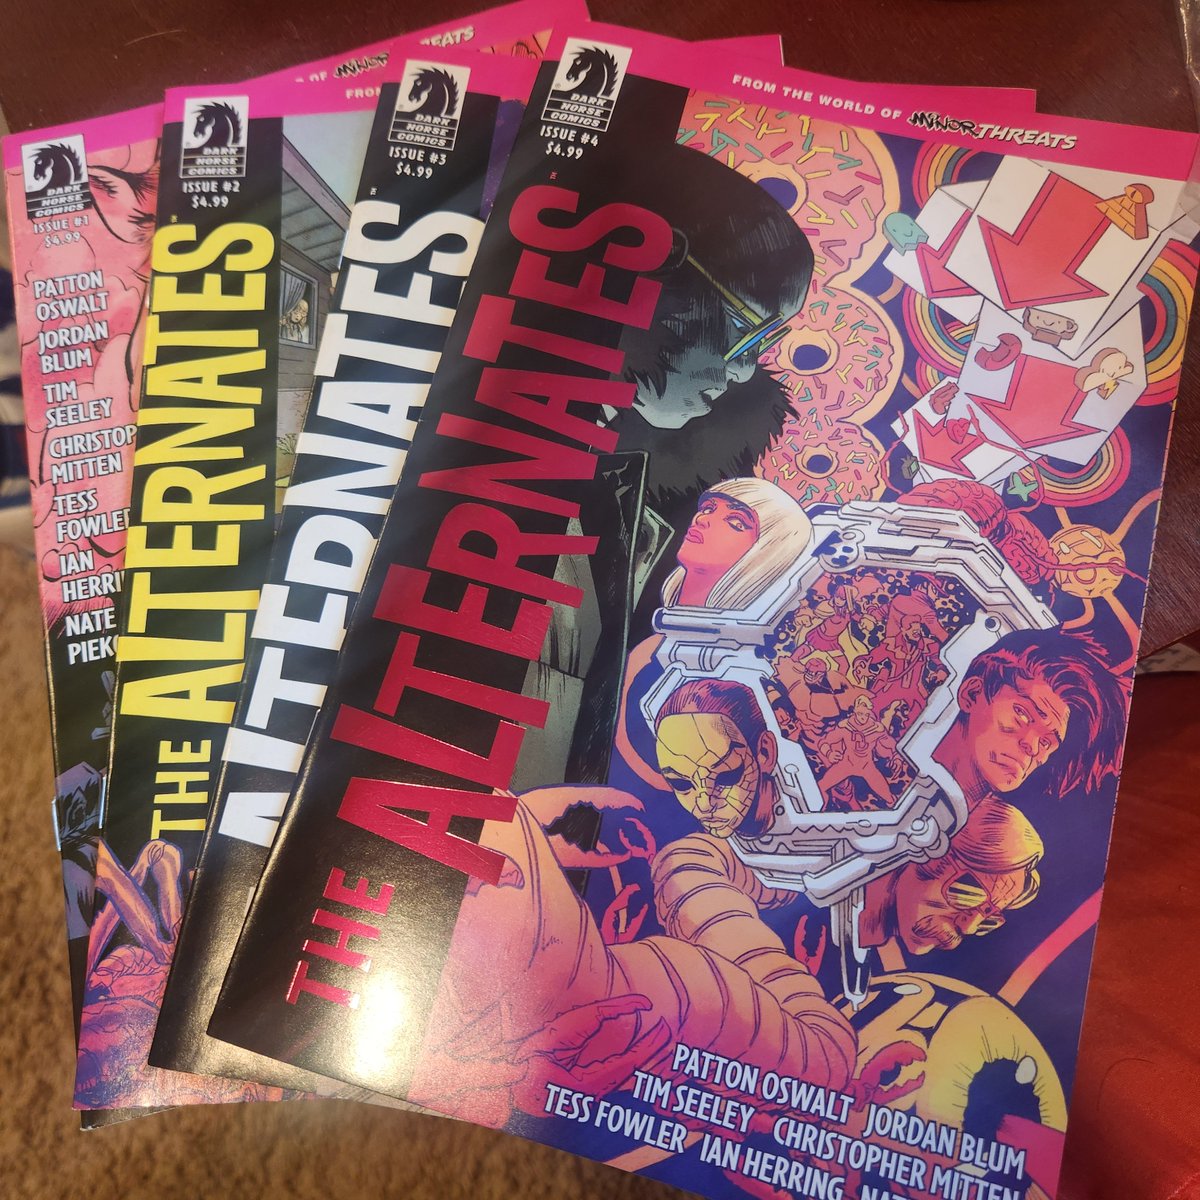 Was finally able to find these bad boys locally in Warwick. 

@DarkHorseComics 

#thealternates #shoplocal